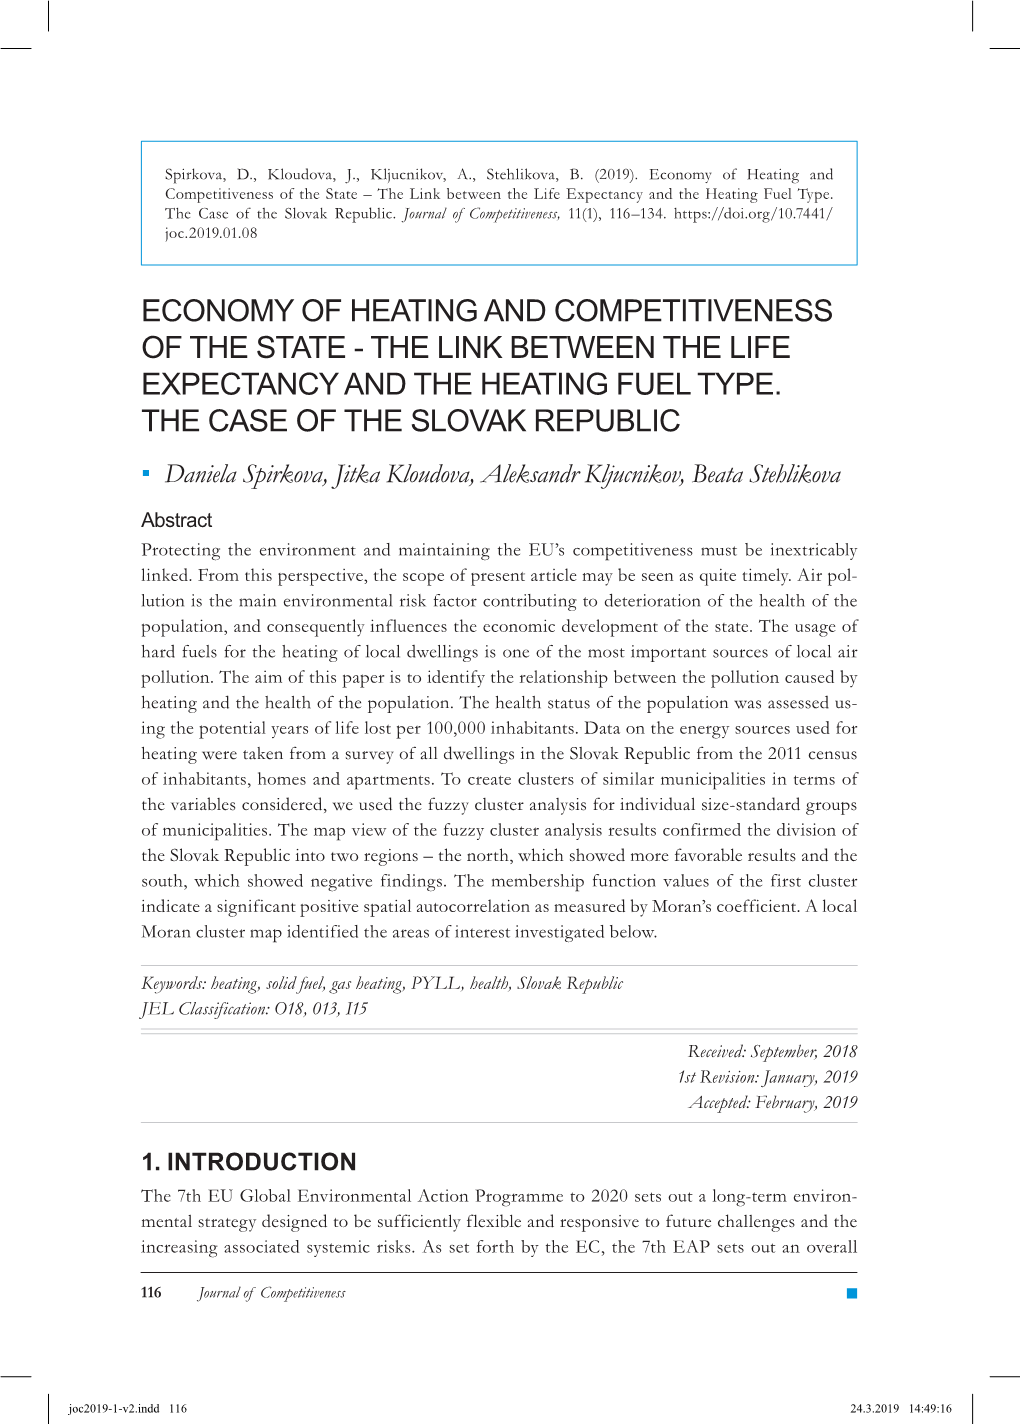 Economy of Heating and Competitiveness of the State – the Link Between the Life Expectancy and the Heating Fuel Type